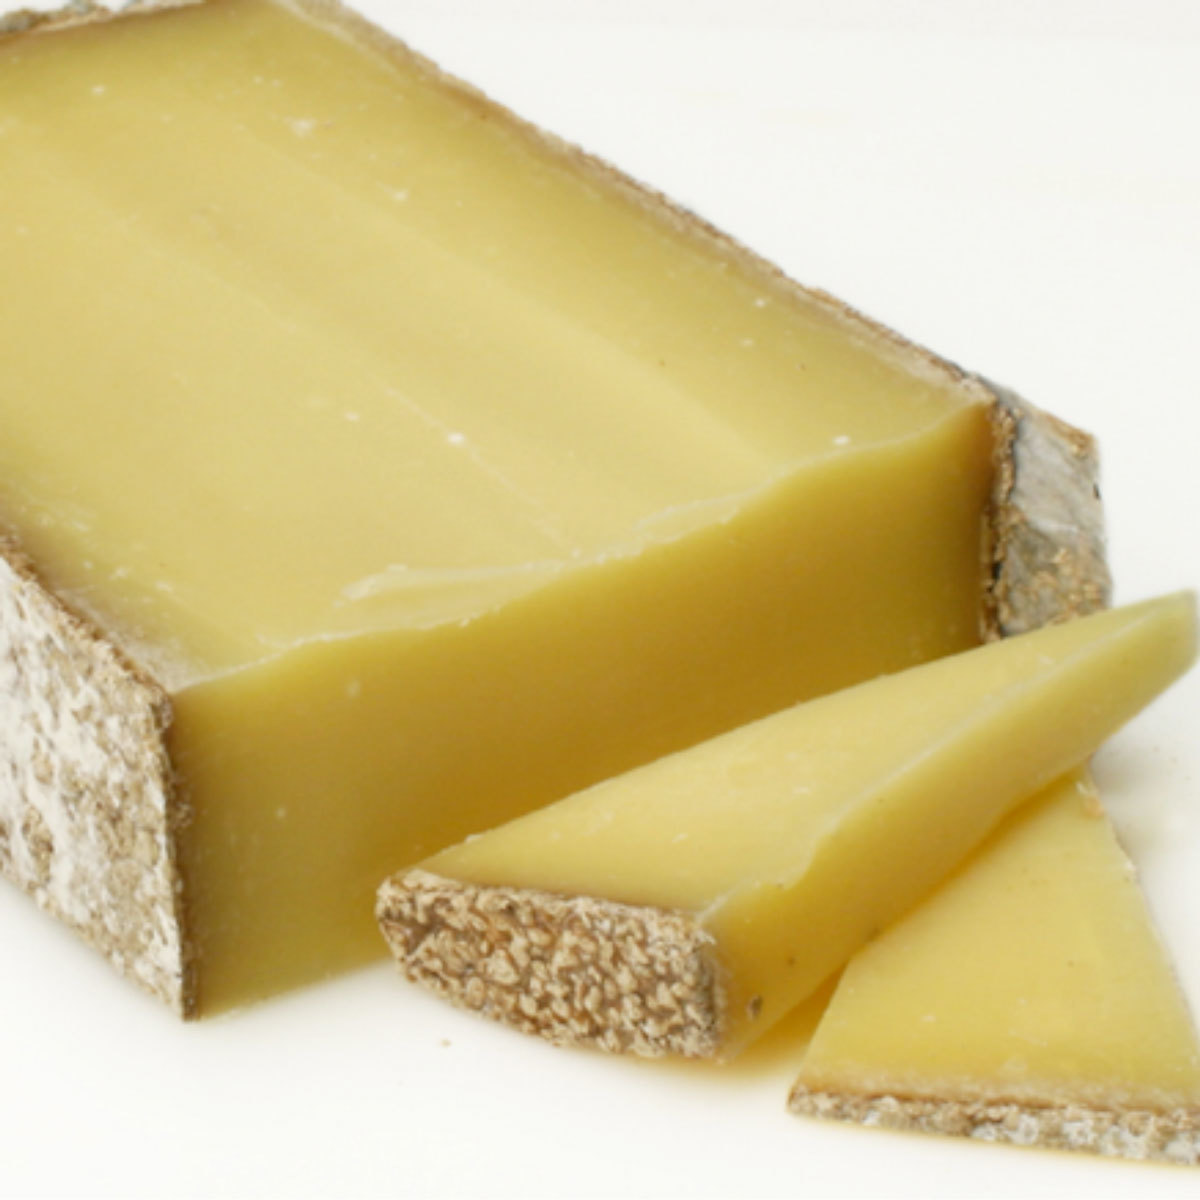 Gruyére Cheese, 2kg (Serves 18-20 people)